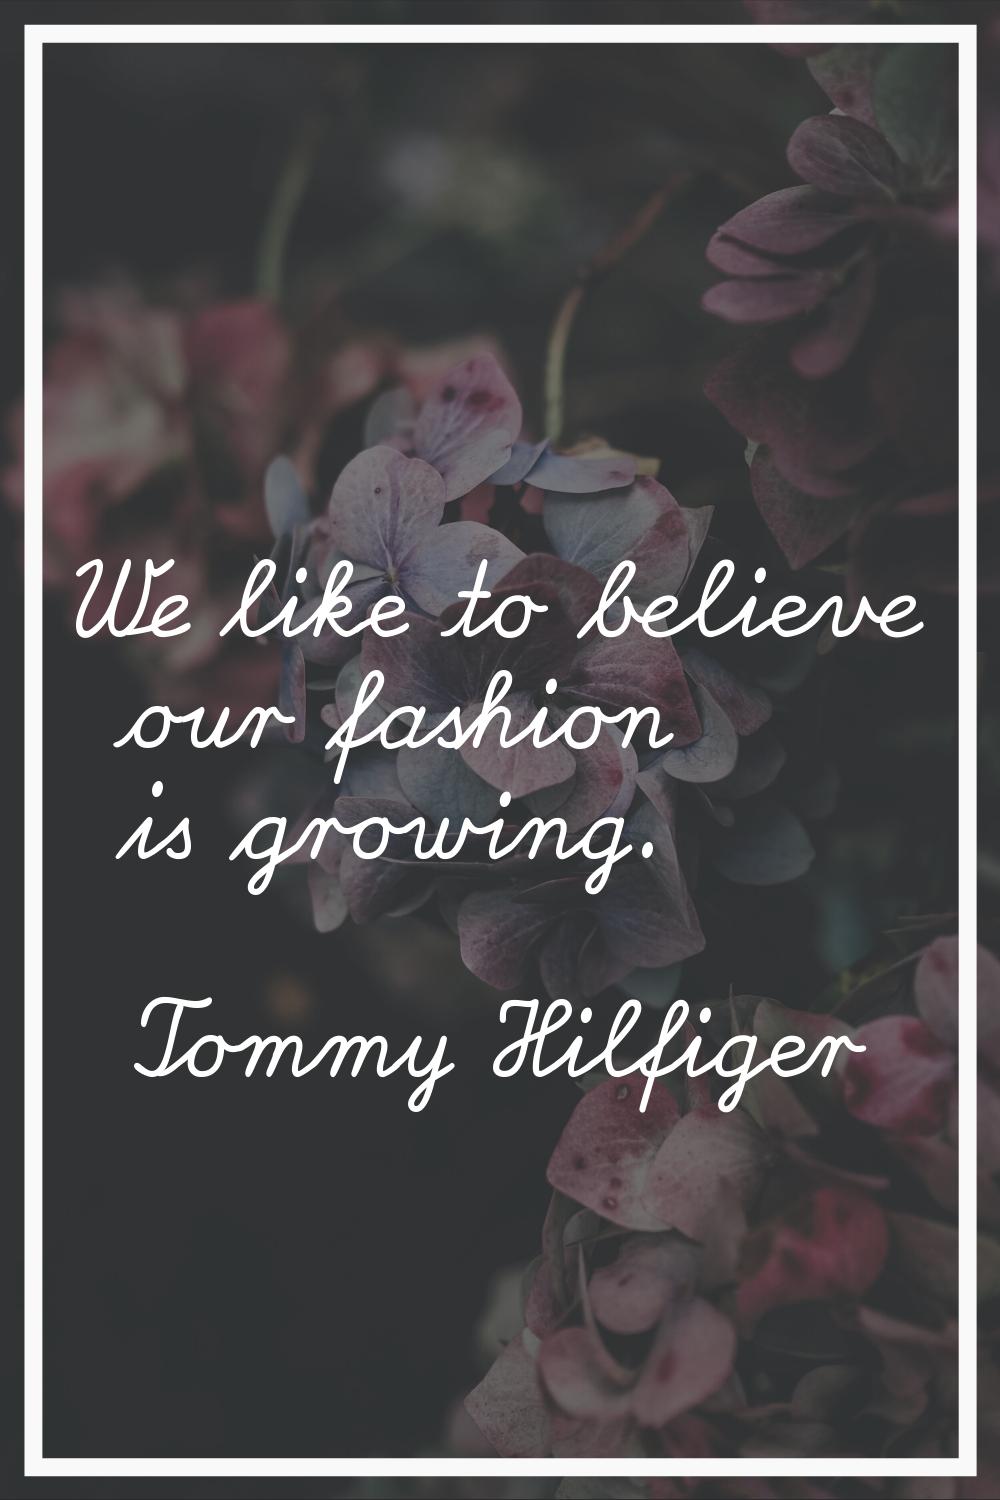 We like to believe our fashion is growing.